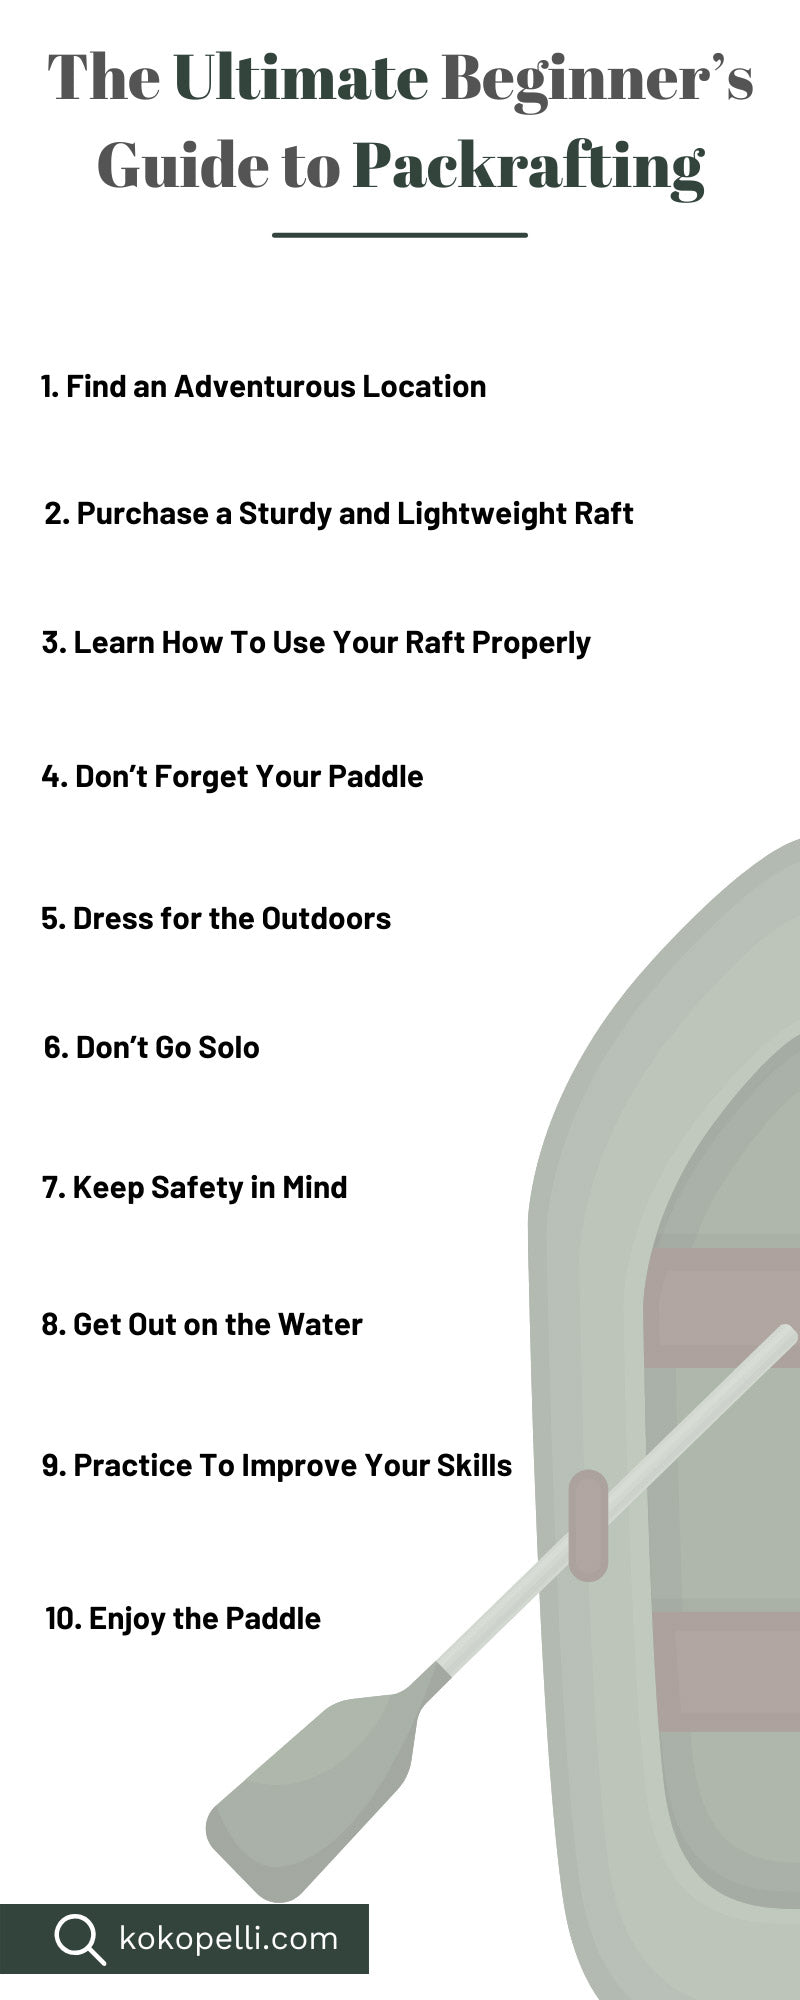 The Ultimate Beginner’s Guide to Packrafting